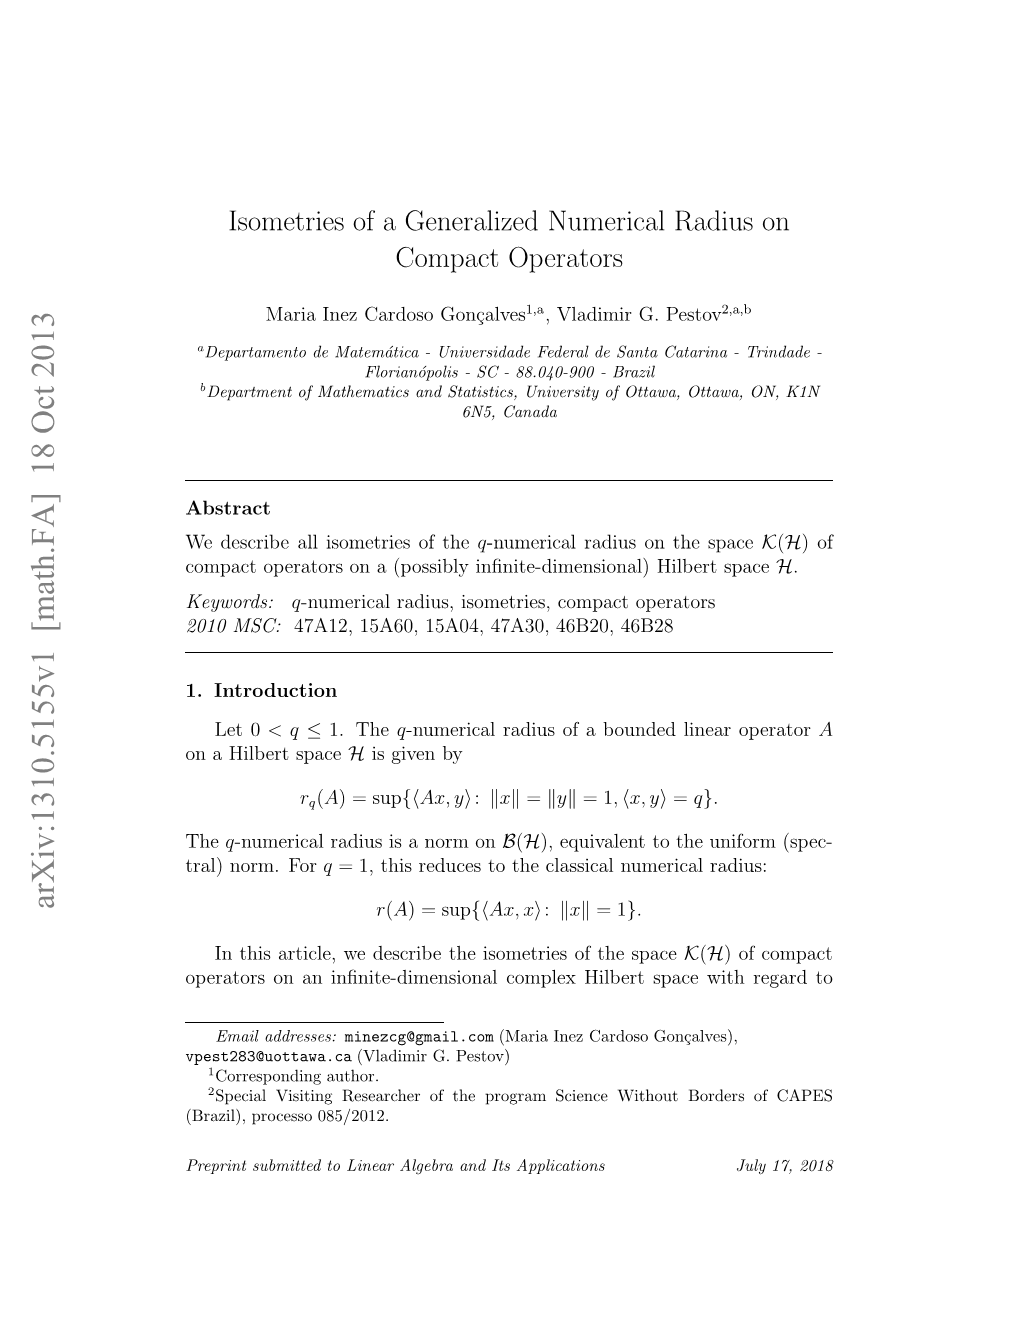 Isometries of a Generalized Numerical Radius on Compact Operators